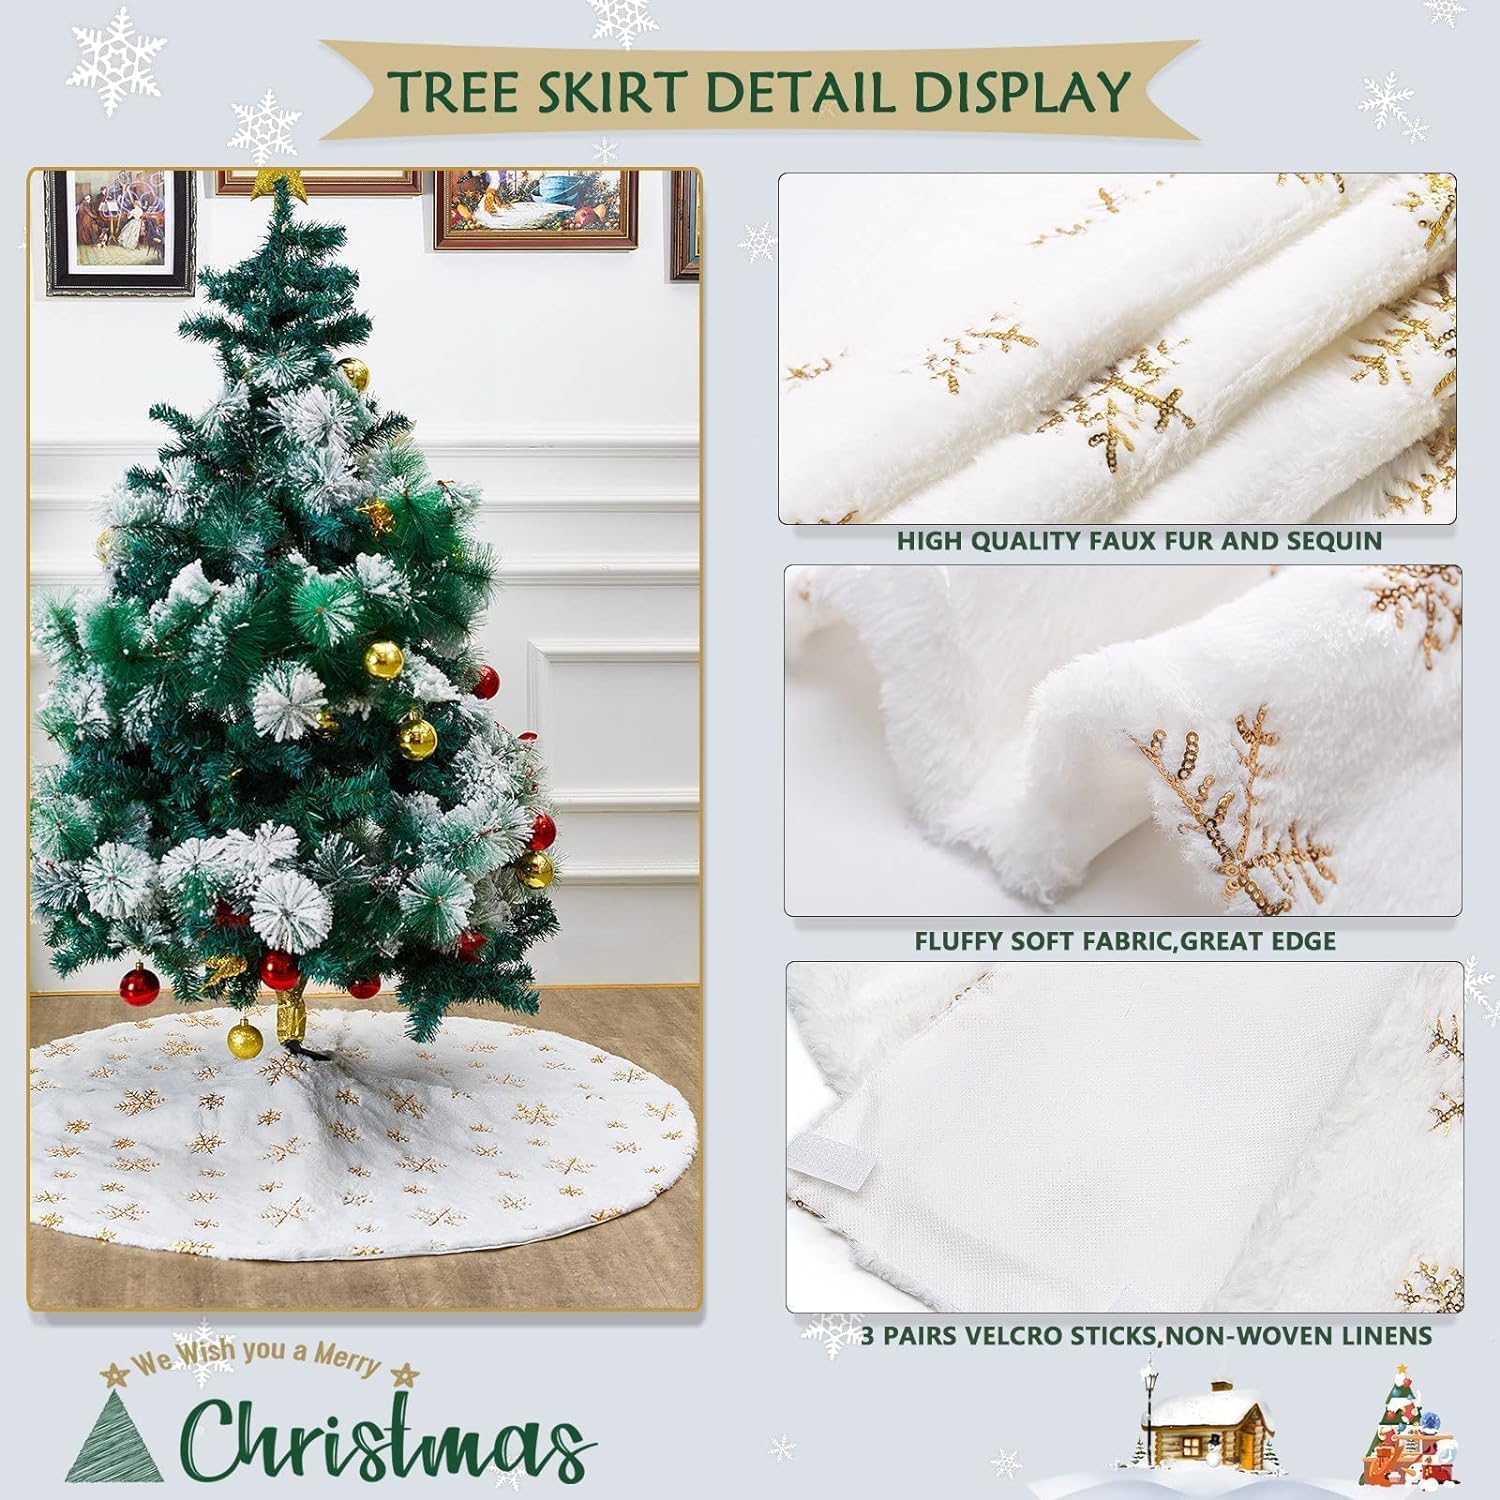 Pretocter Christmas Tree Skirt for Christmas Decoration Luxury Faux Fur Christmas Tree Mat Sequin Snowflake Christmas Tree Base Cover Xmas Tree Ornaments for Xmas Party Holiday Decorations 90CM-Gold